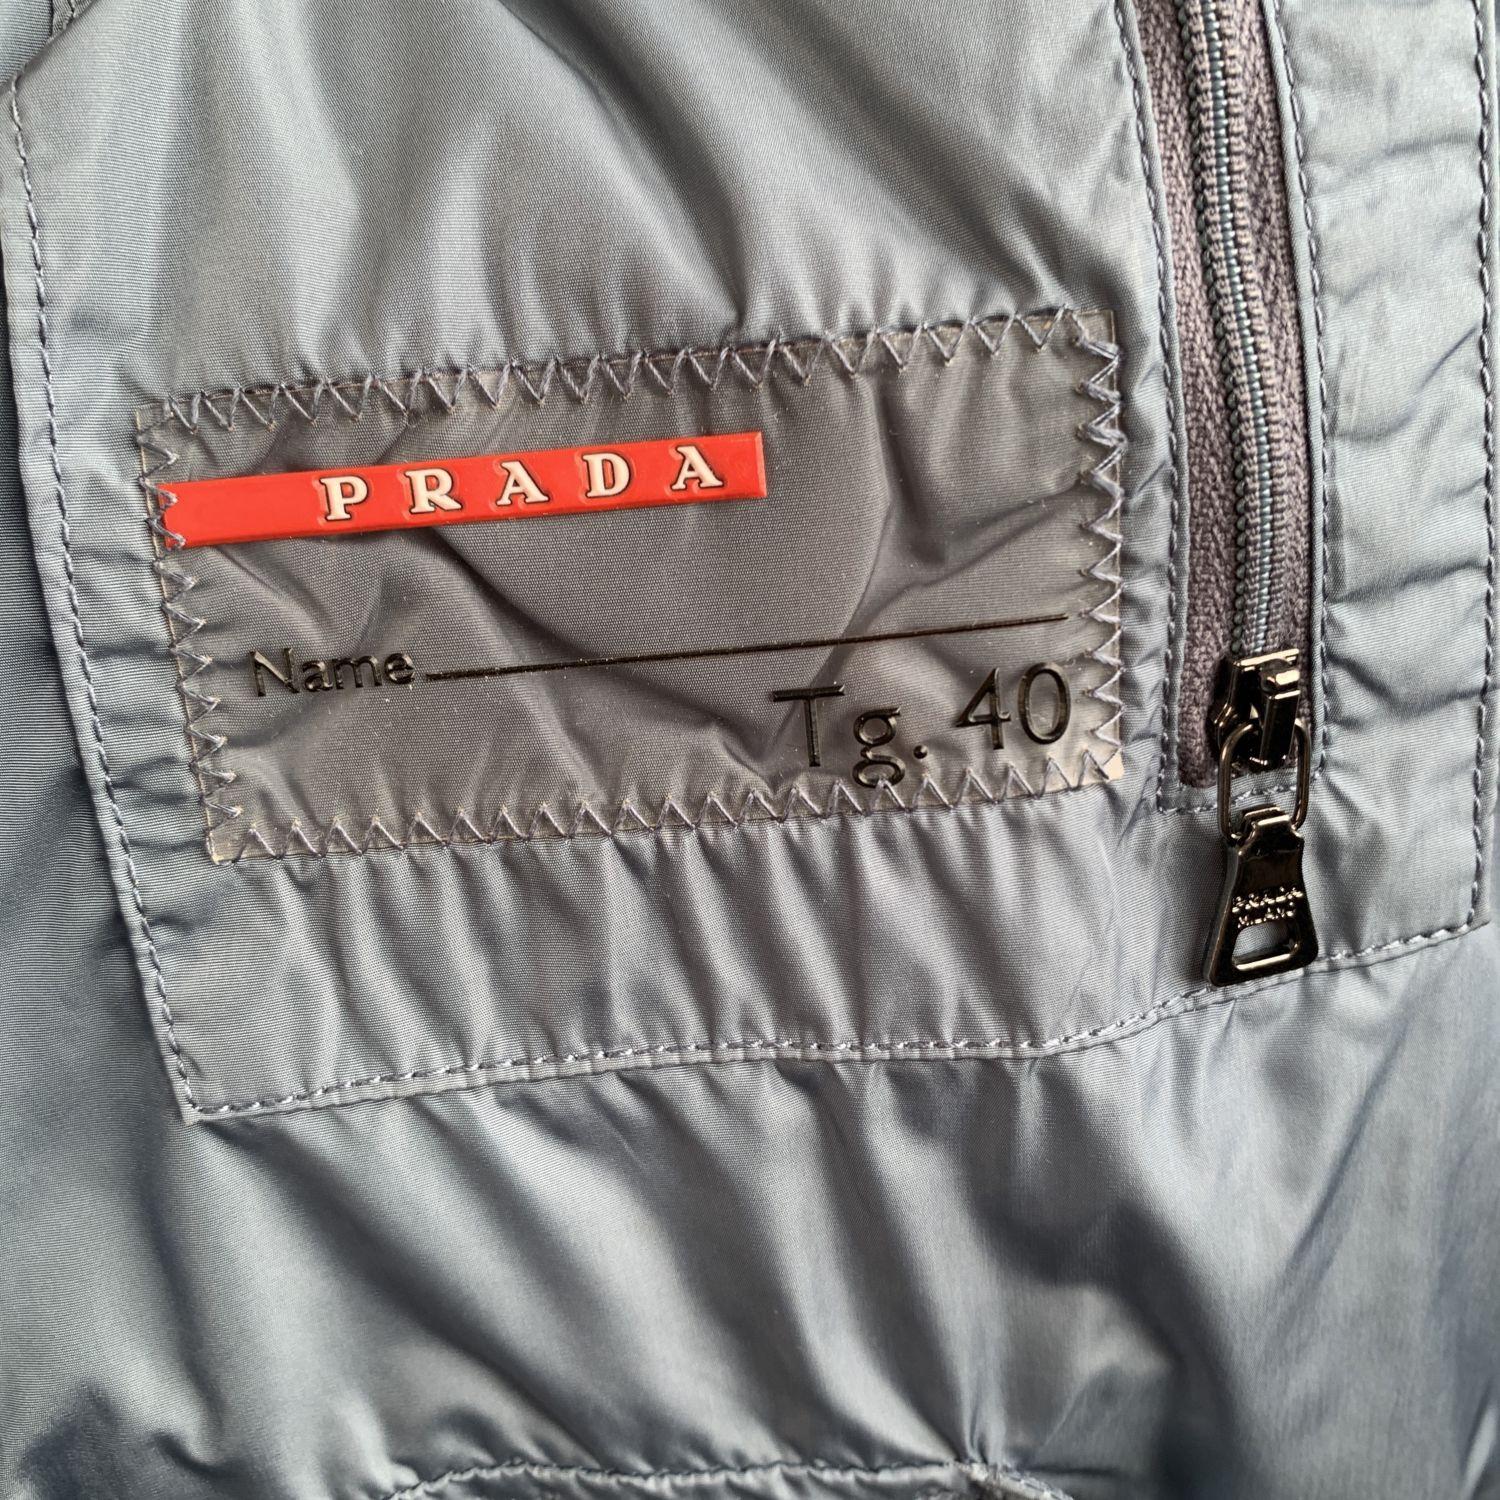 PRADA light blue nylon puffer down jacket, Art. 280721. It features a hooded neckline,  beaver fur trim on the hood, down feathers filling, simple quilted shape, zip  closure on the front. 2 zip pockets on the waist and interior pockets.